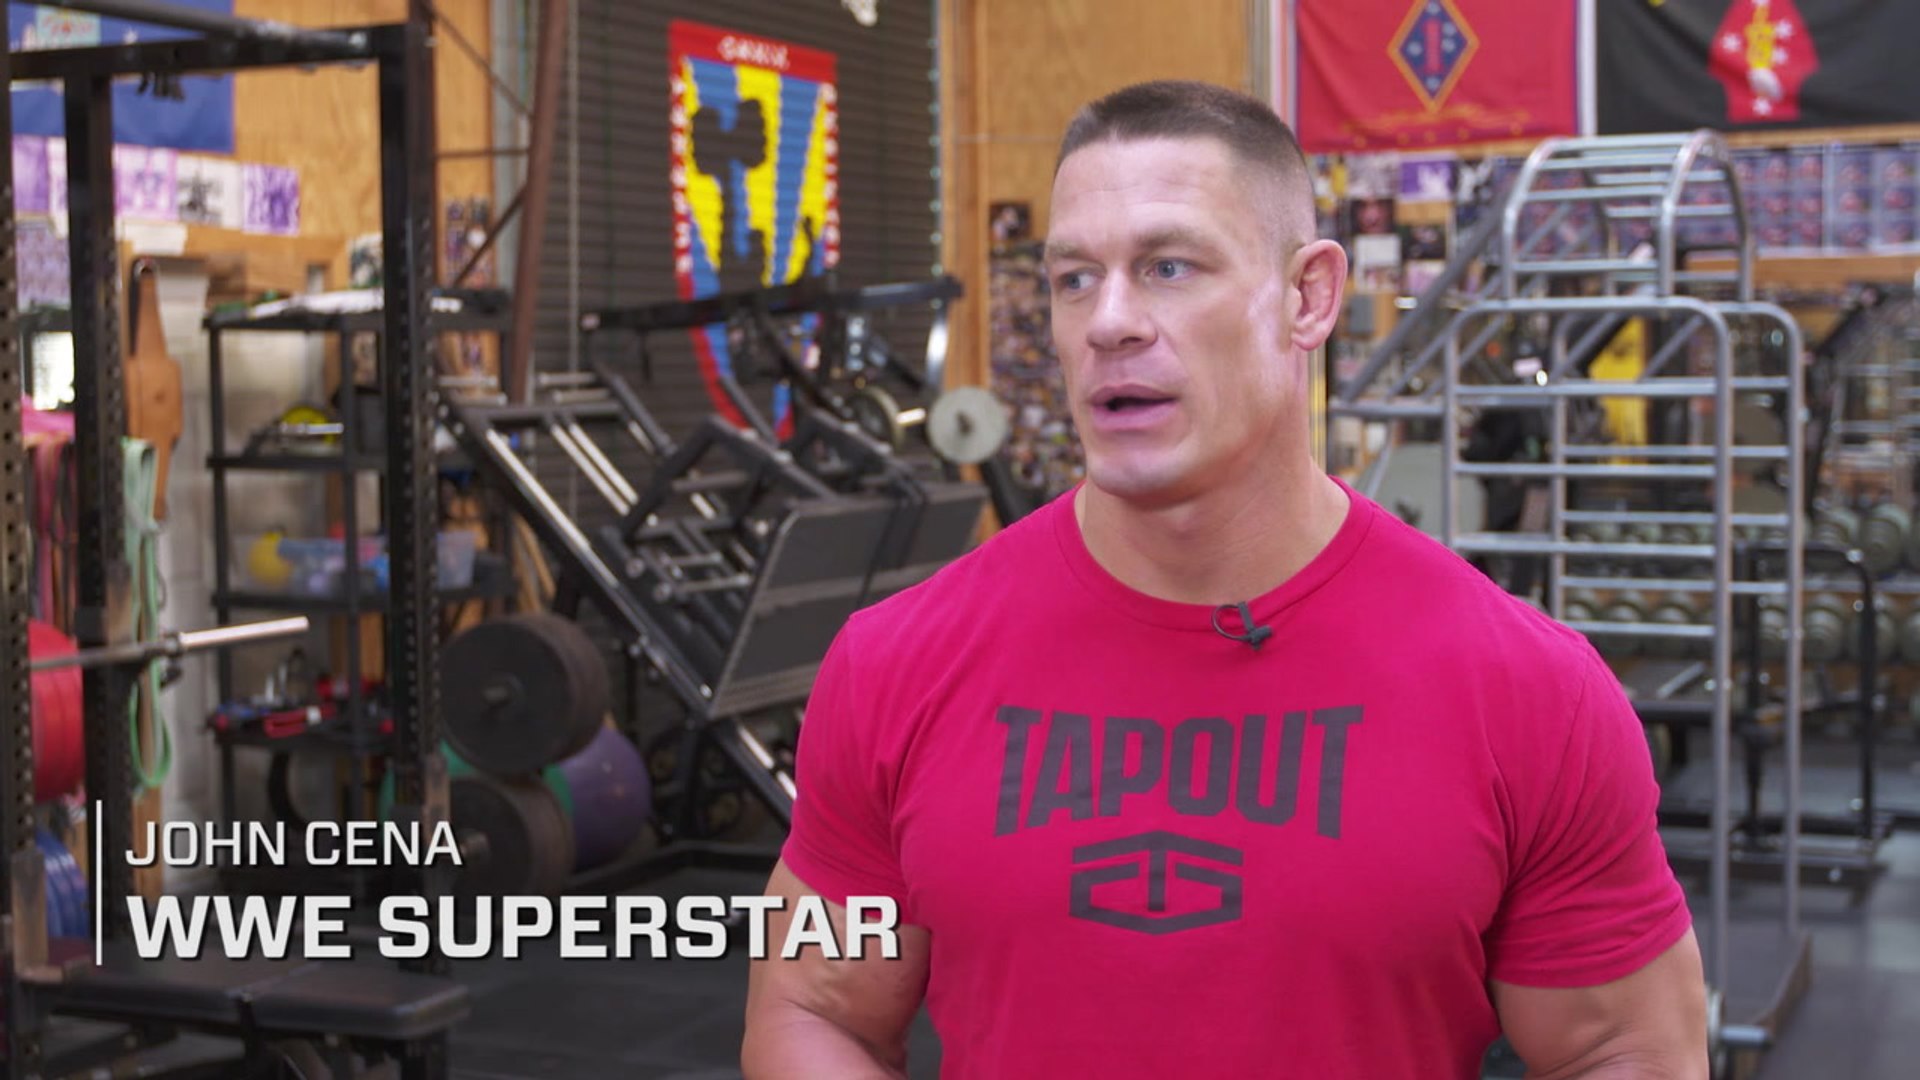 Behind the scenes at the john cena cover shoot